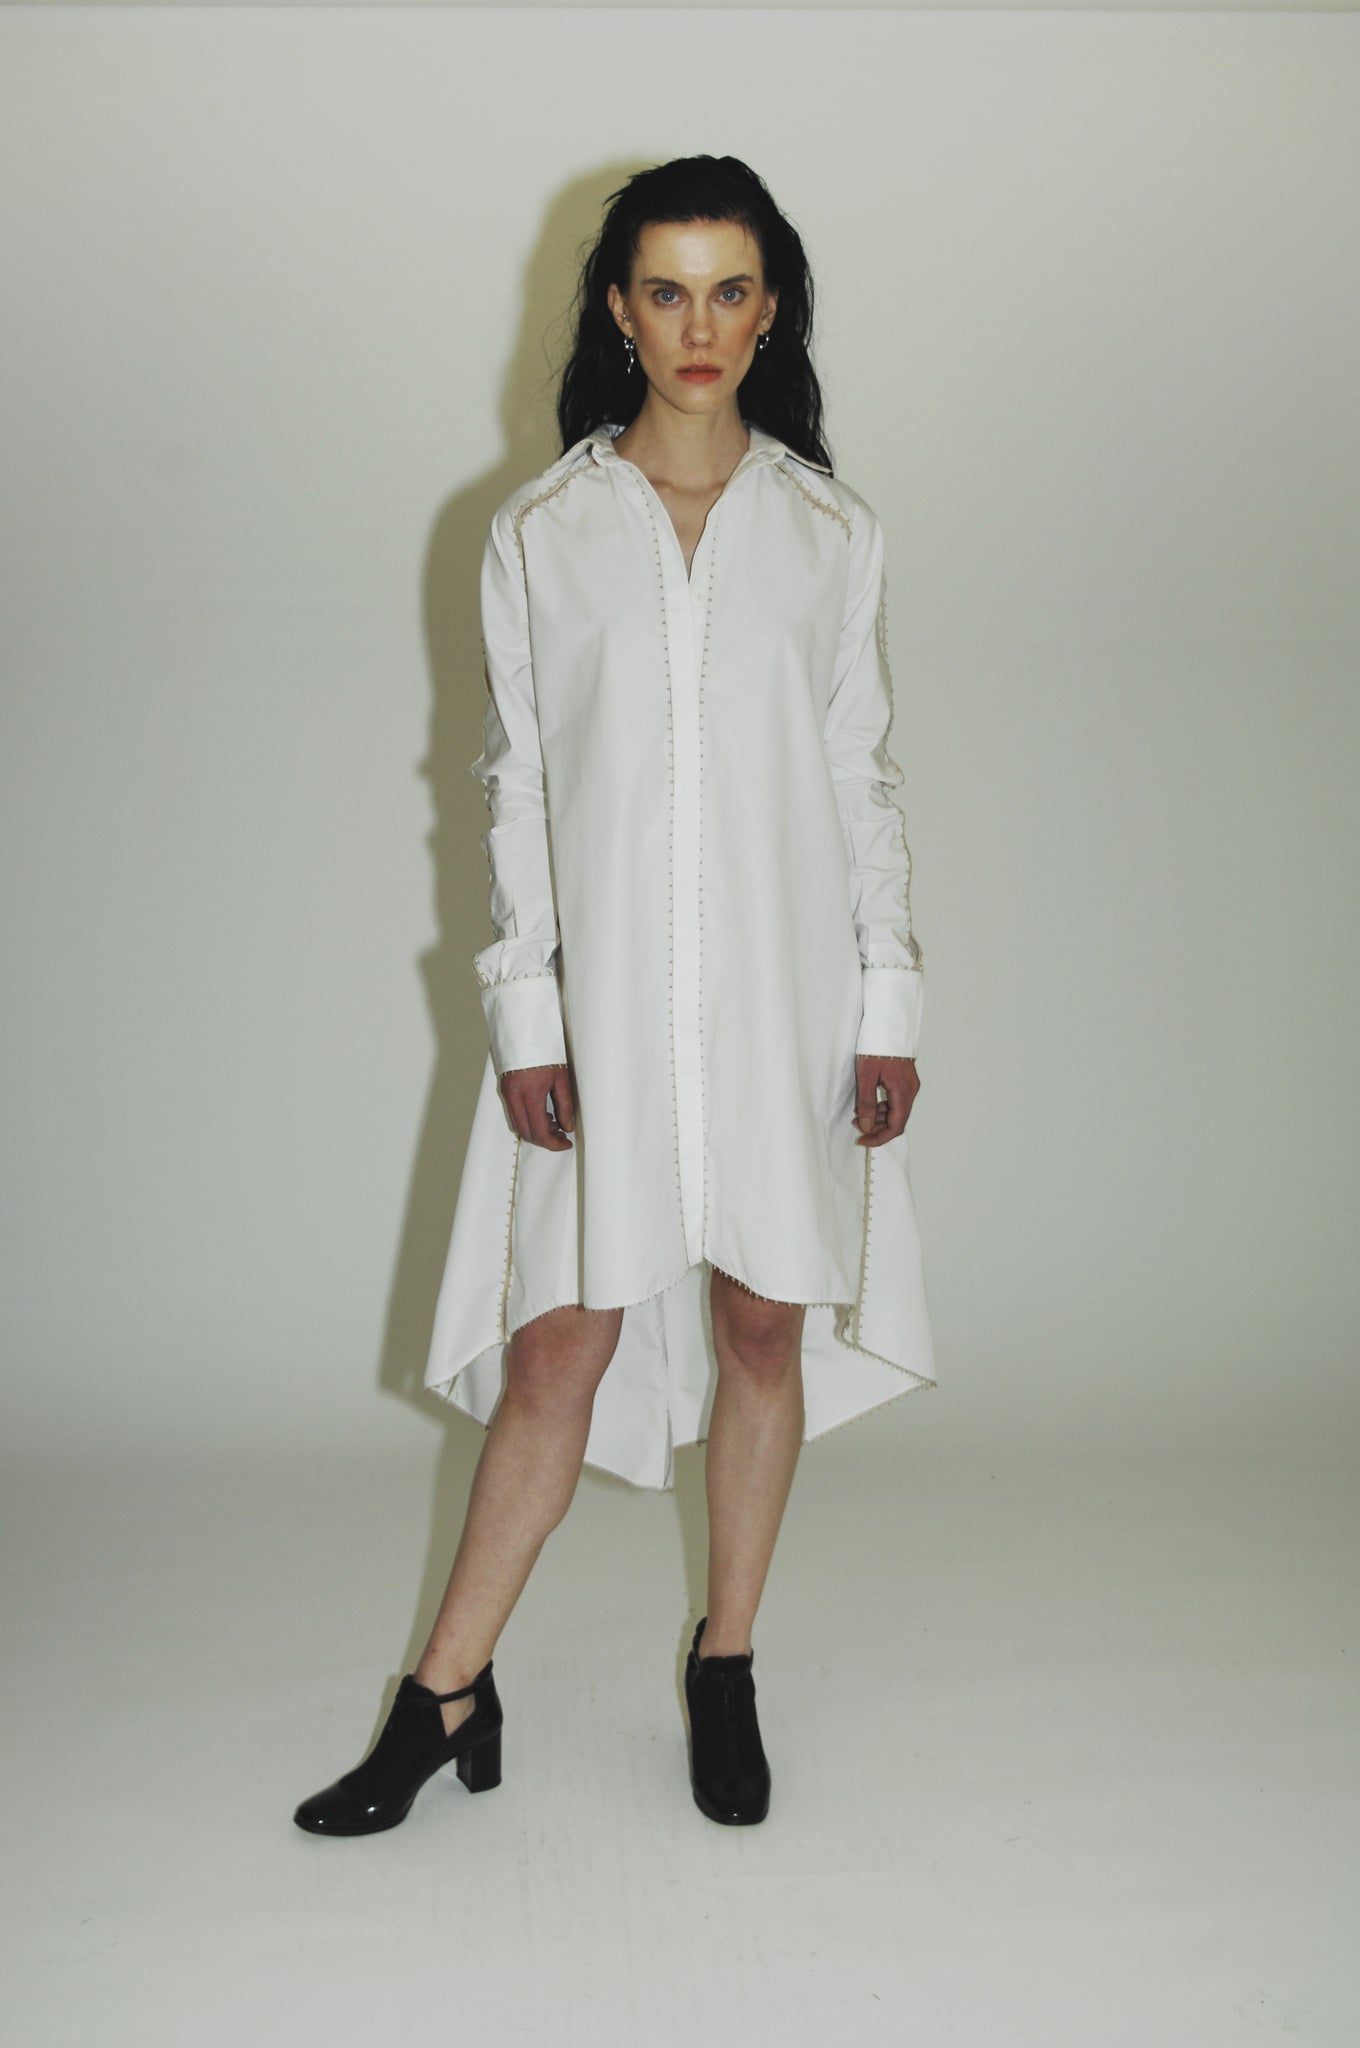 Sophisticated white shirt with a unique and elegant design for women